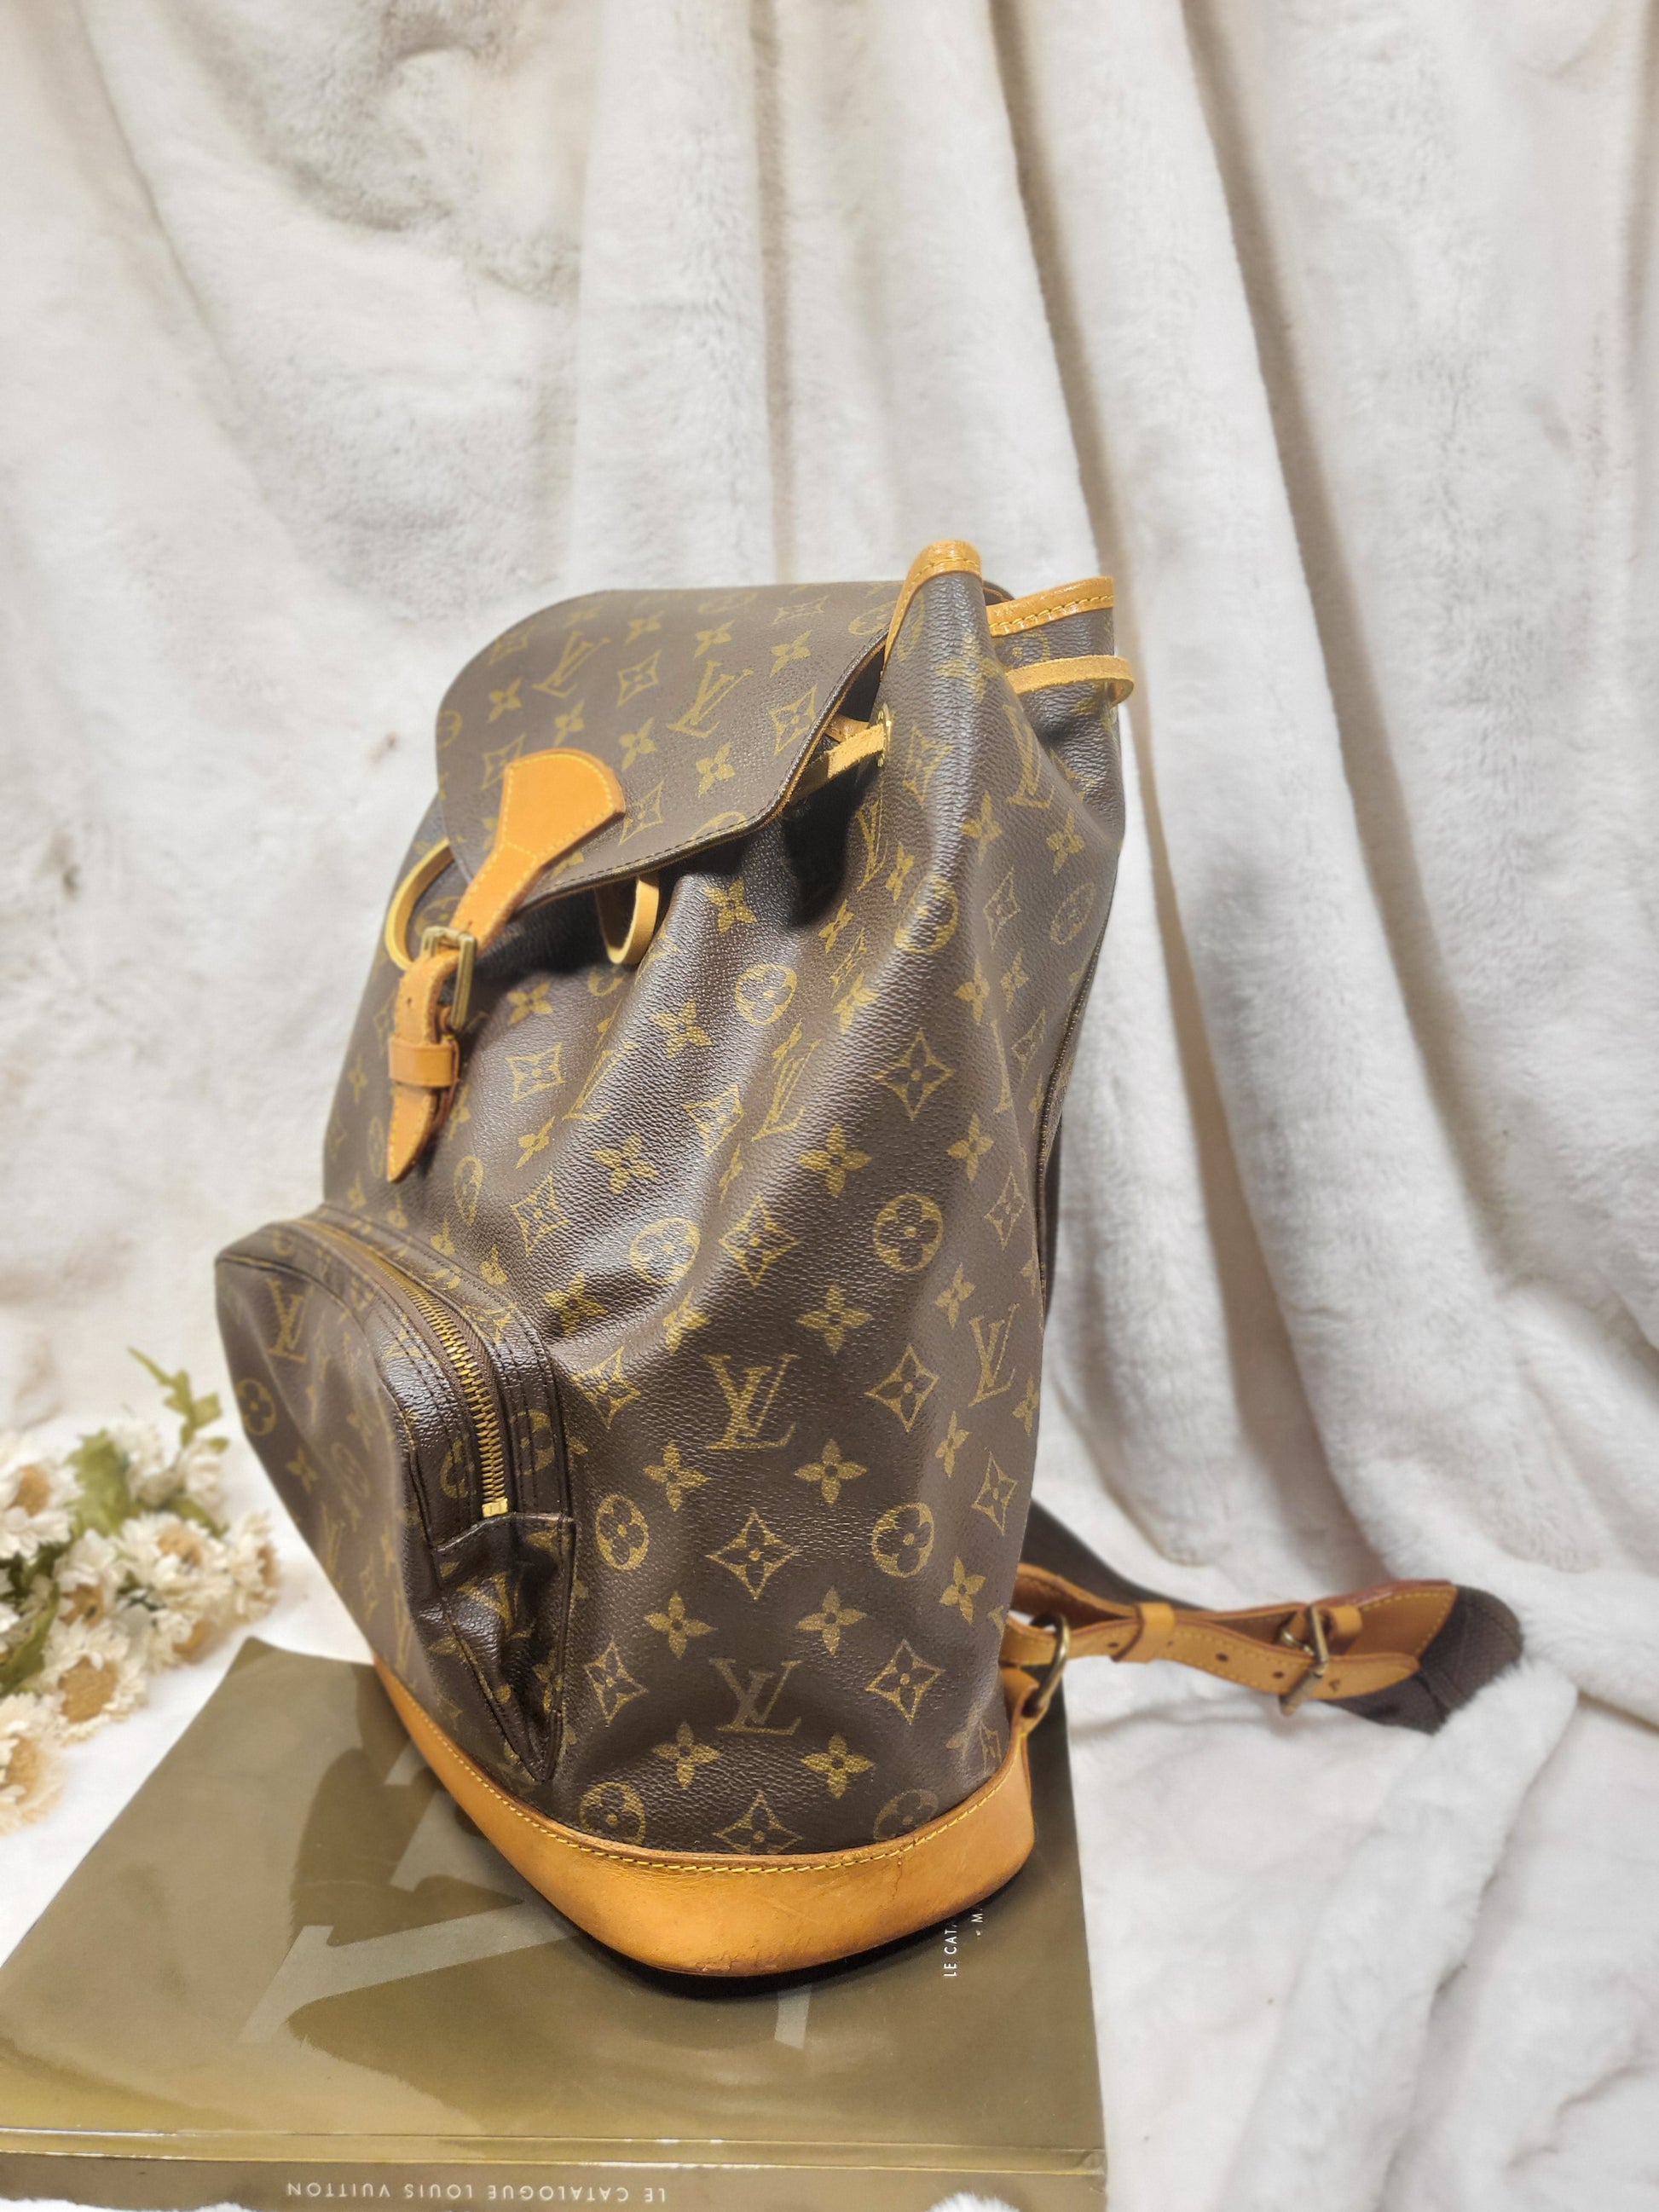 Monogram Montsouris Gm Backpack (Authentic Pre-Owned)